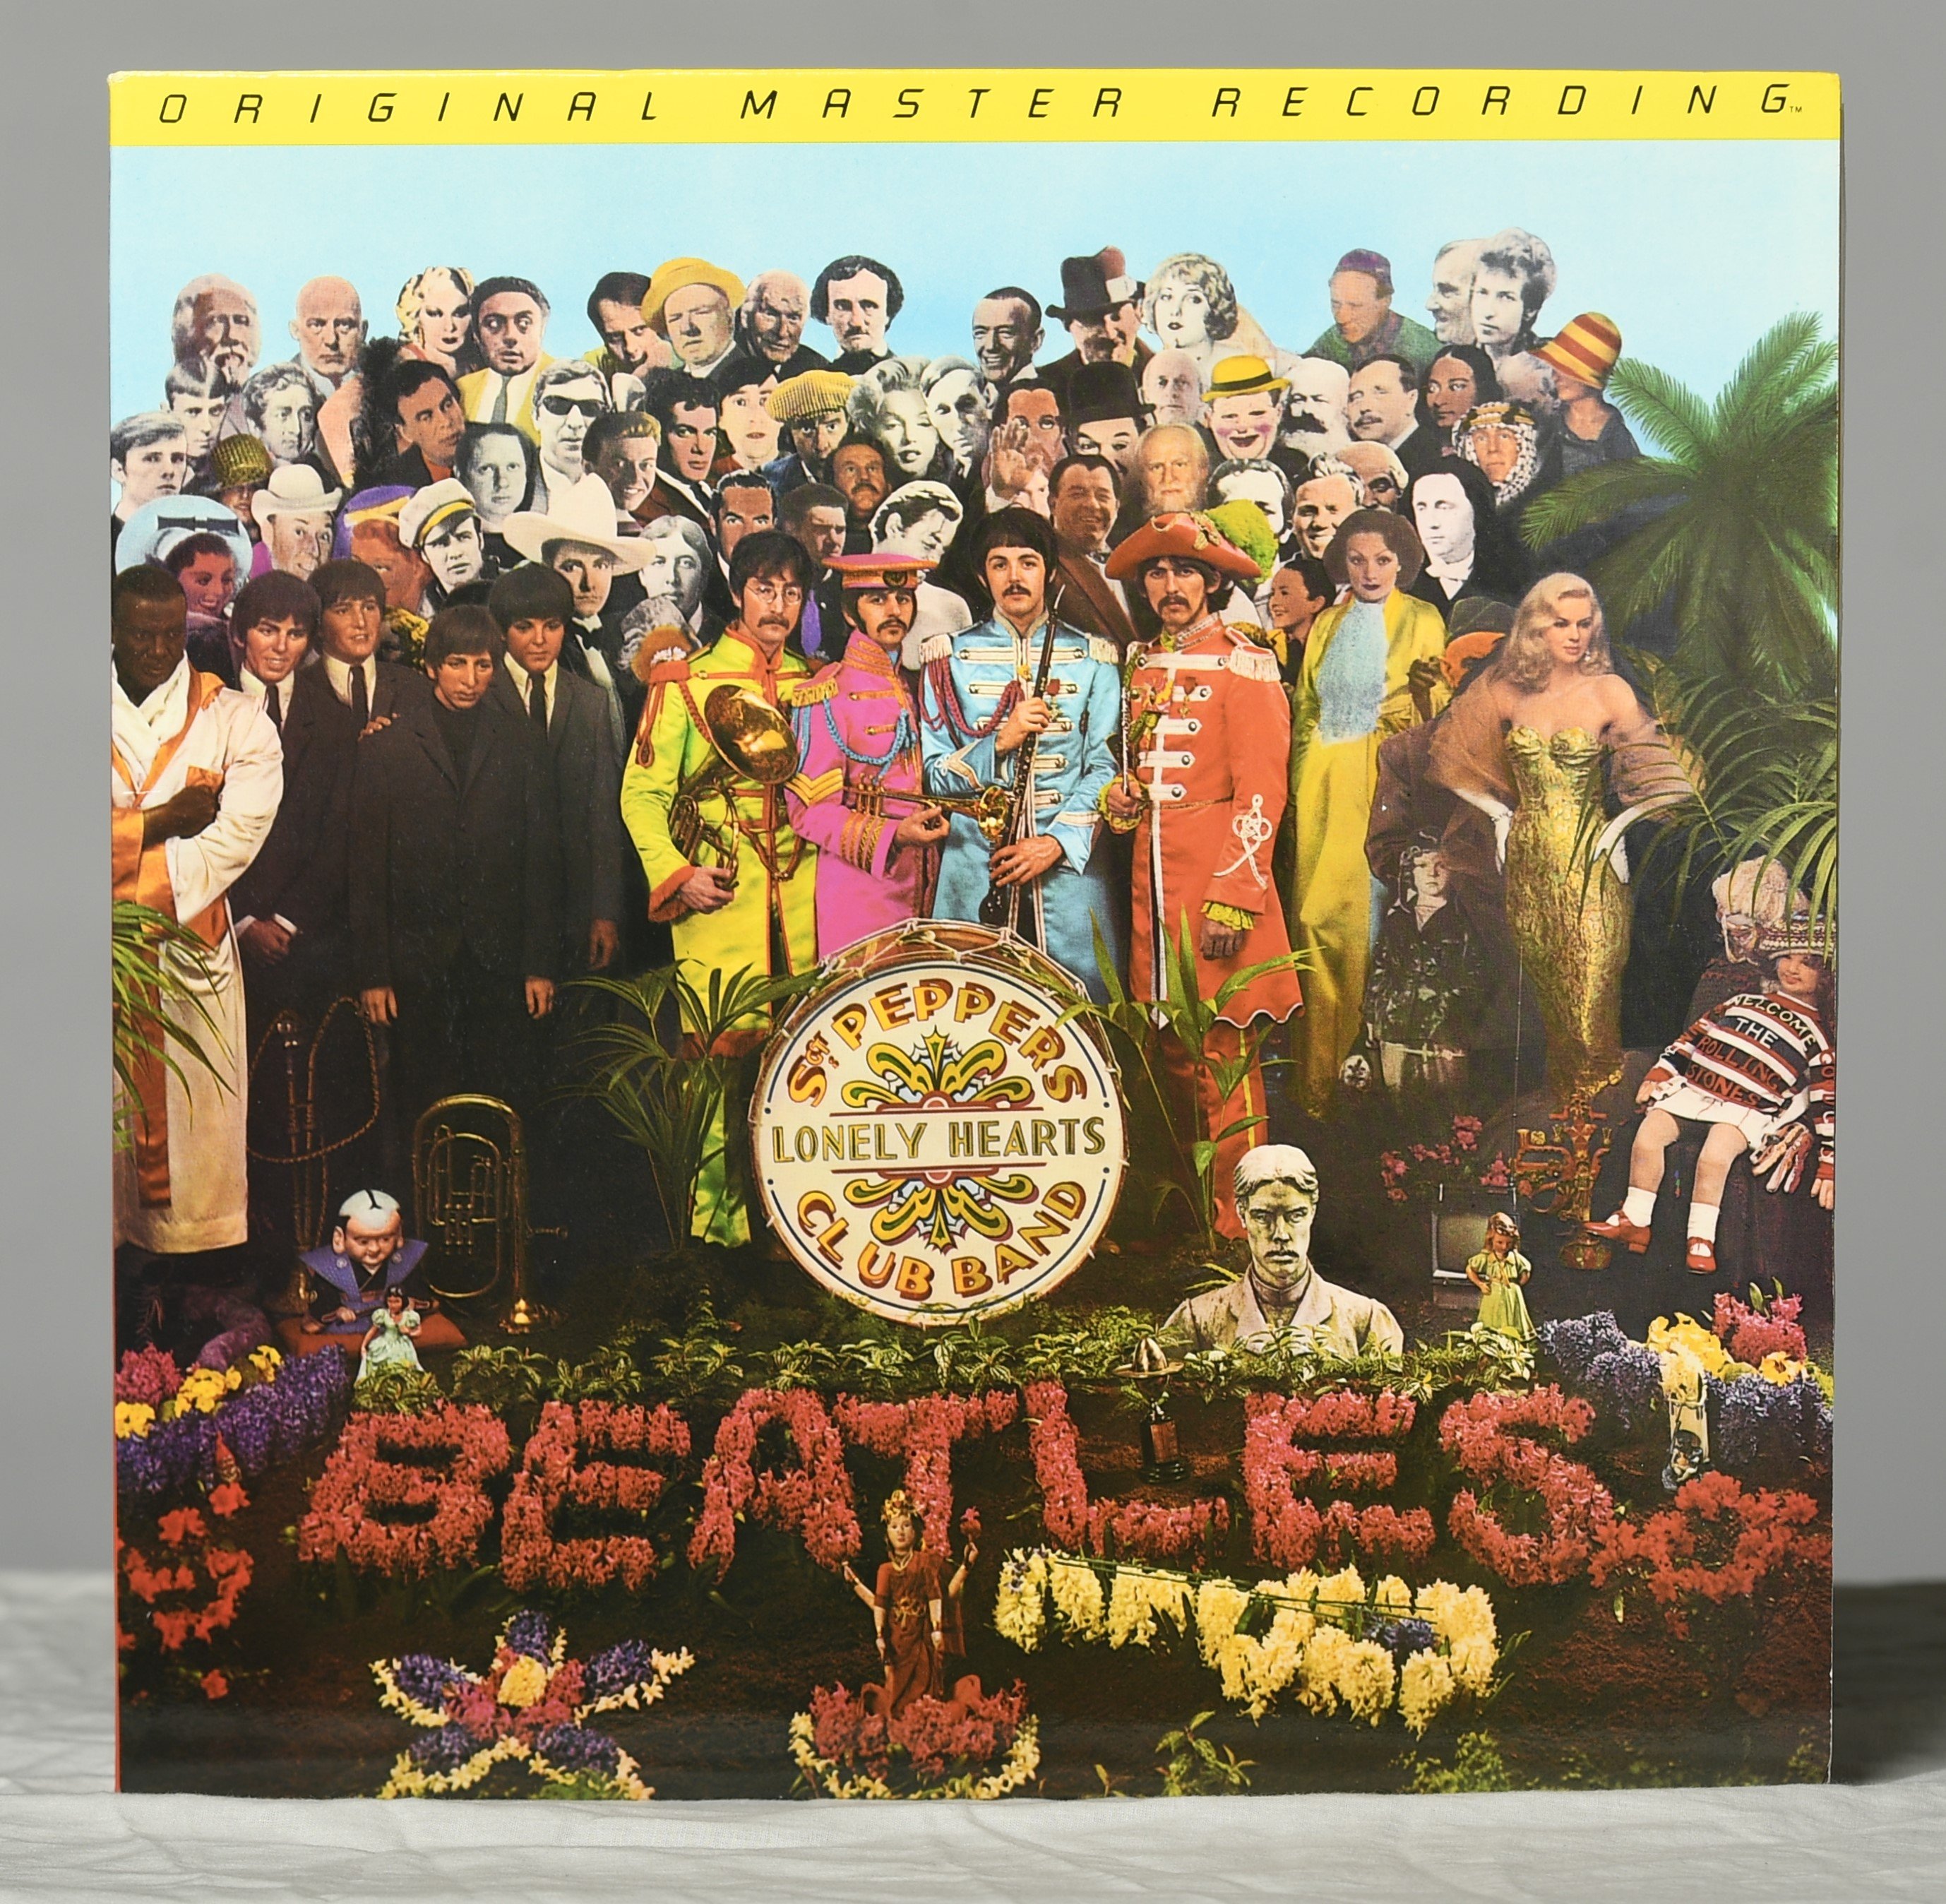 1 Song From The Beatles' 'Sgt. Pepper' Was Inspired by Mean Teachers